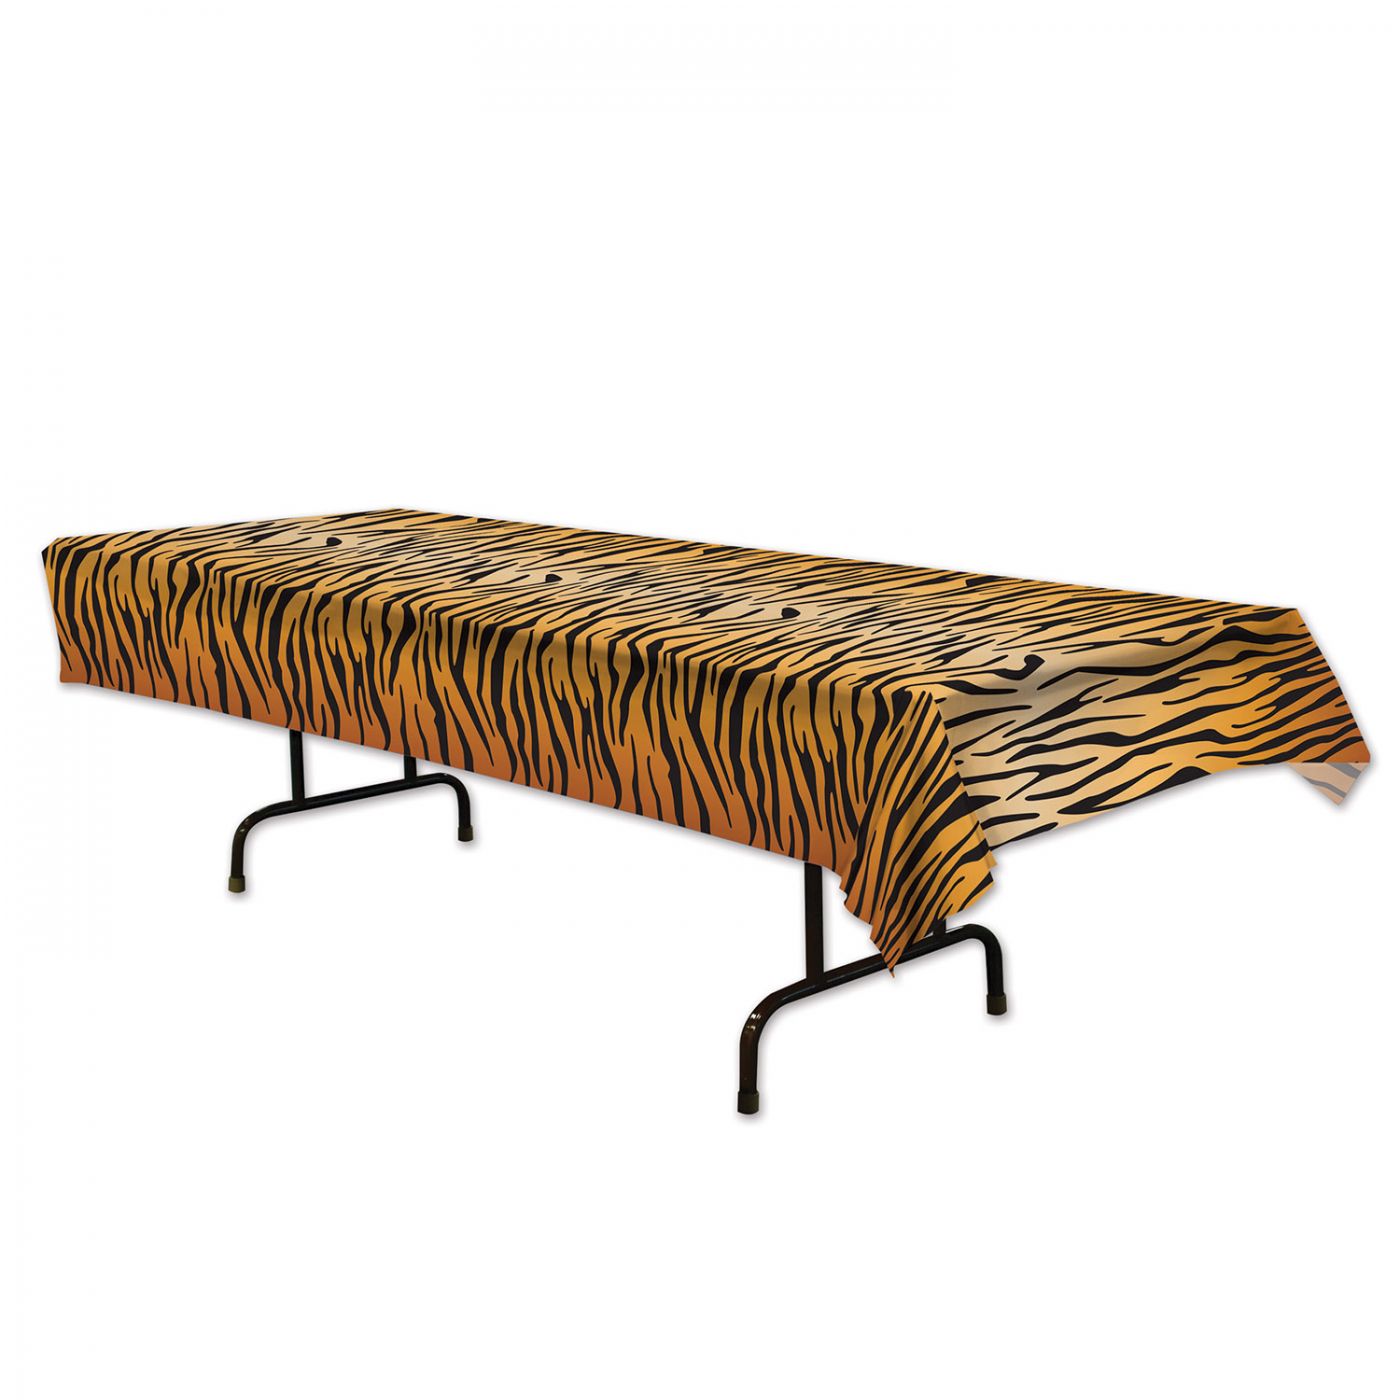 Tiger Print Tablecover image